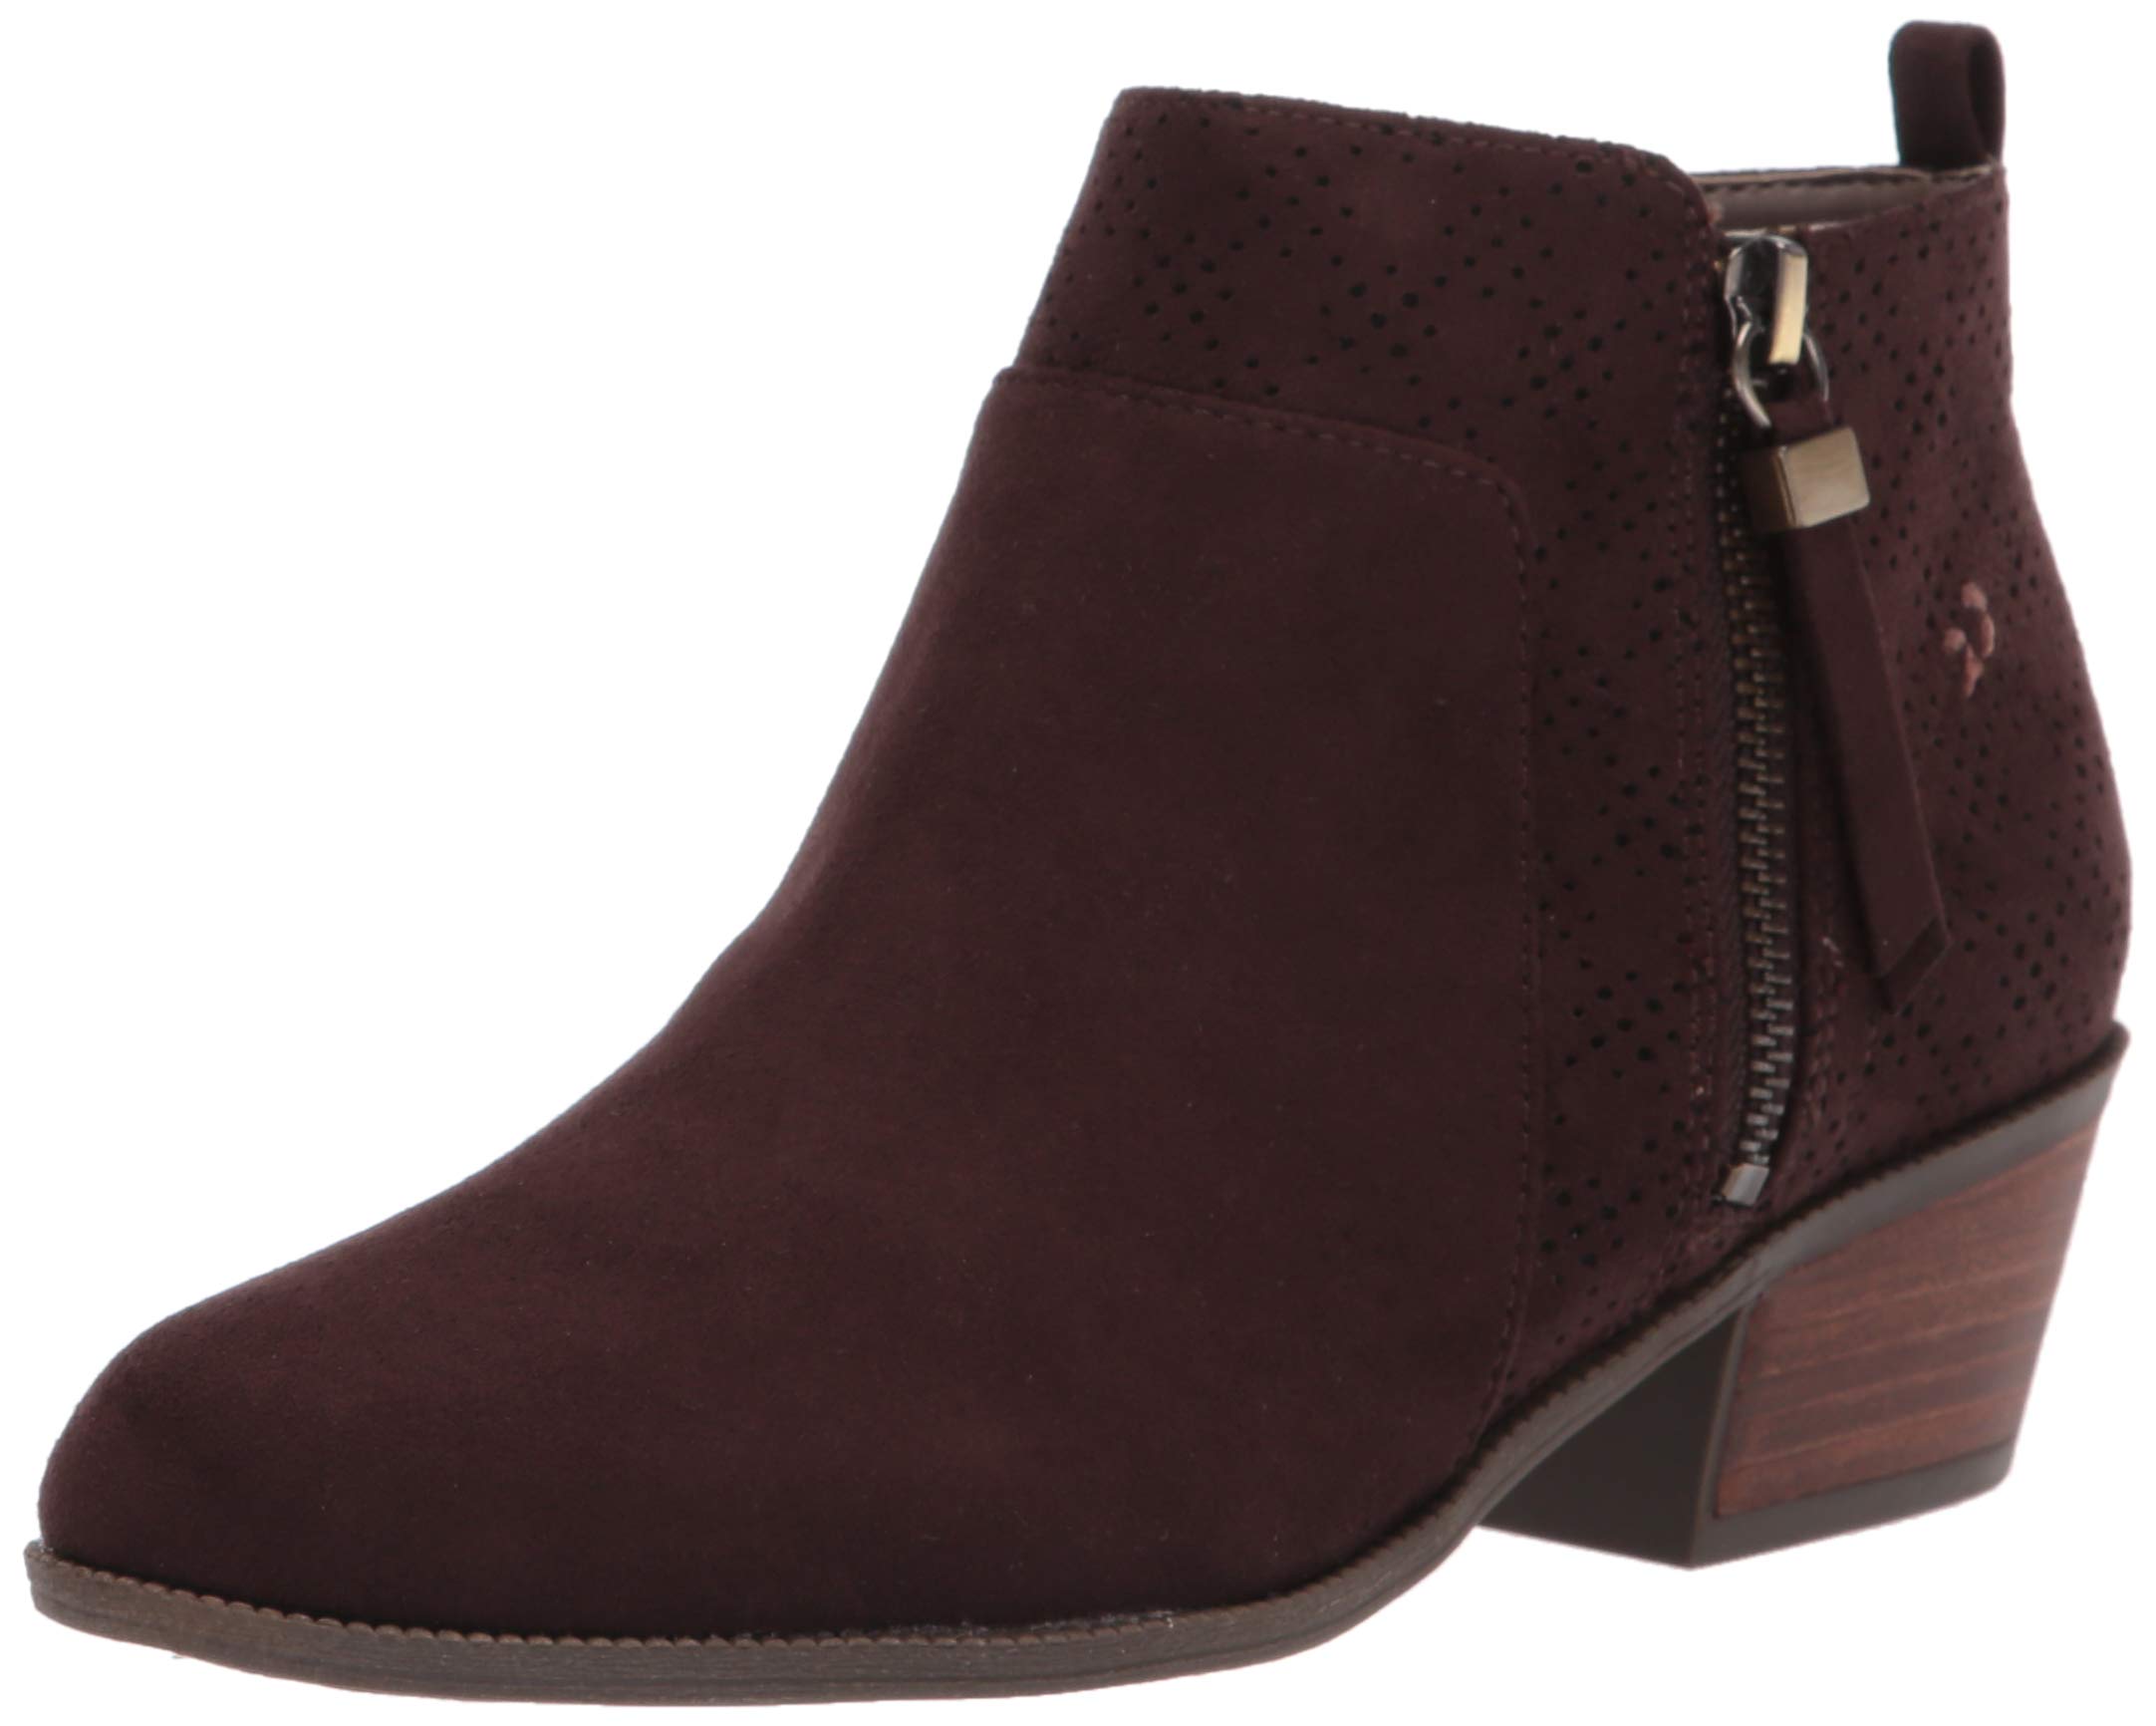 Dr. Scholl's Shoes womens Brianna Ankle Boot